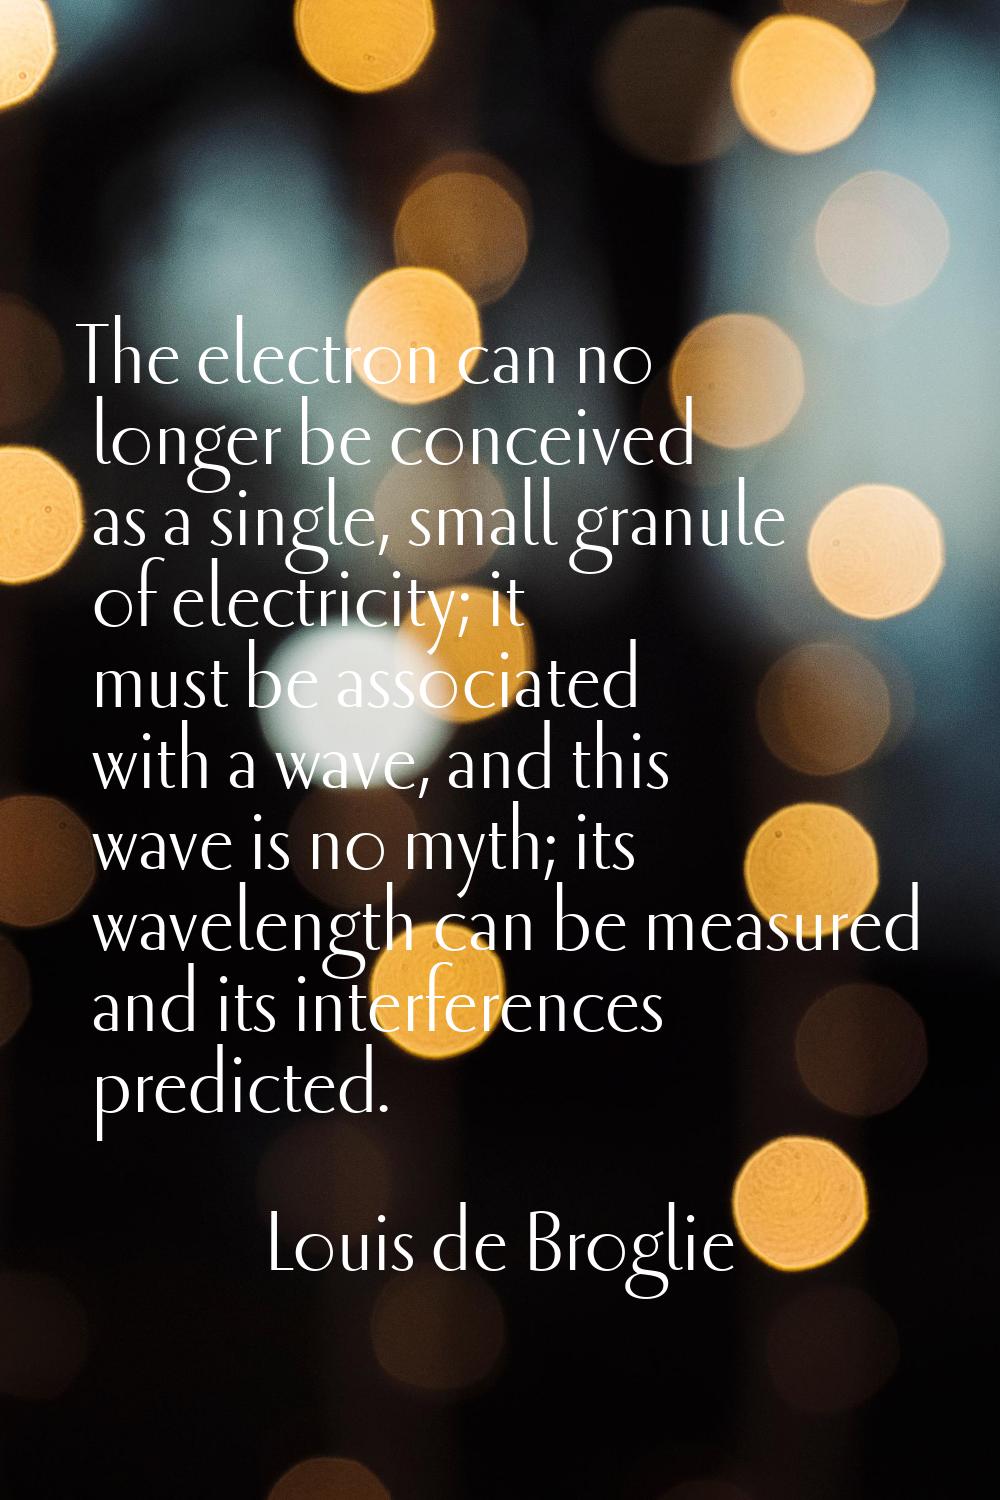 The electron can no longer be conceived as a single, small granule of electricity; it must be assoc